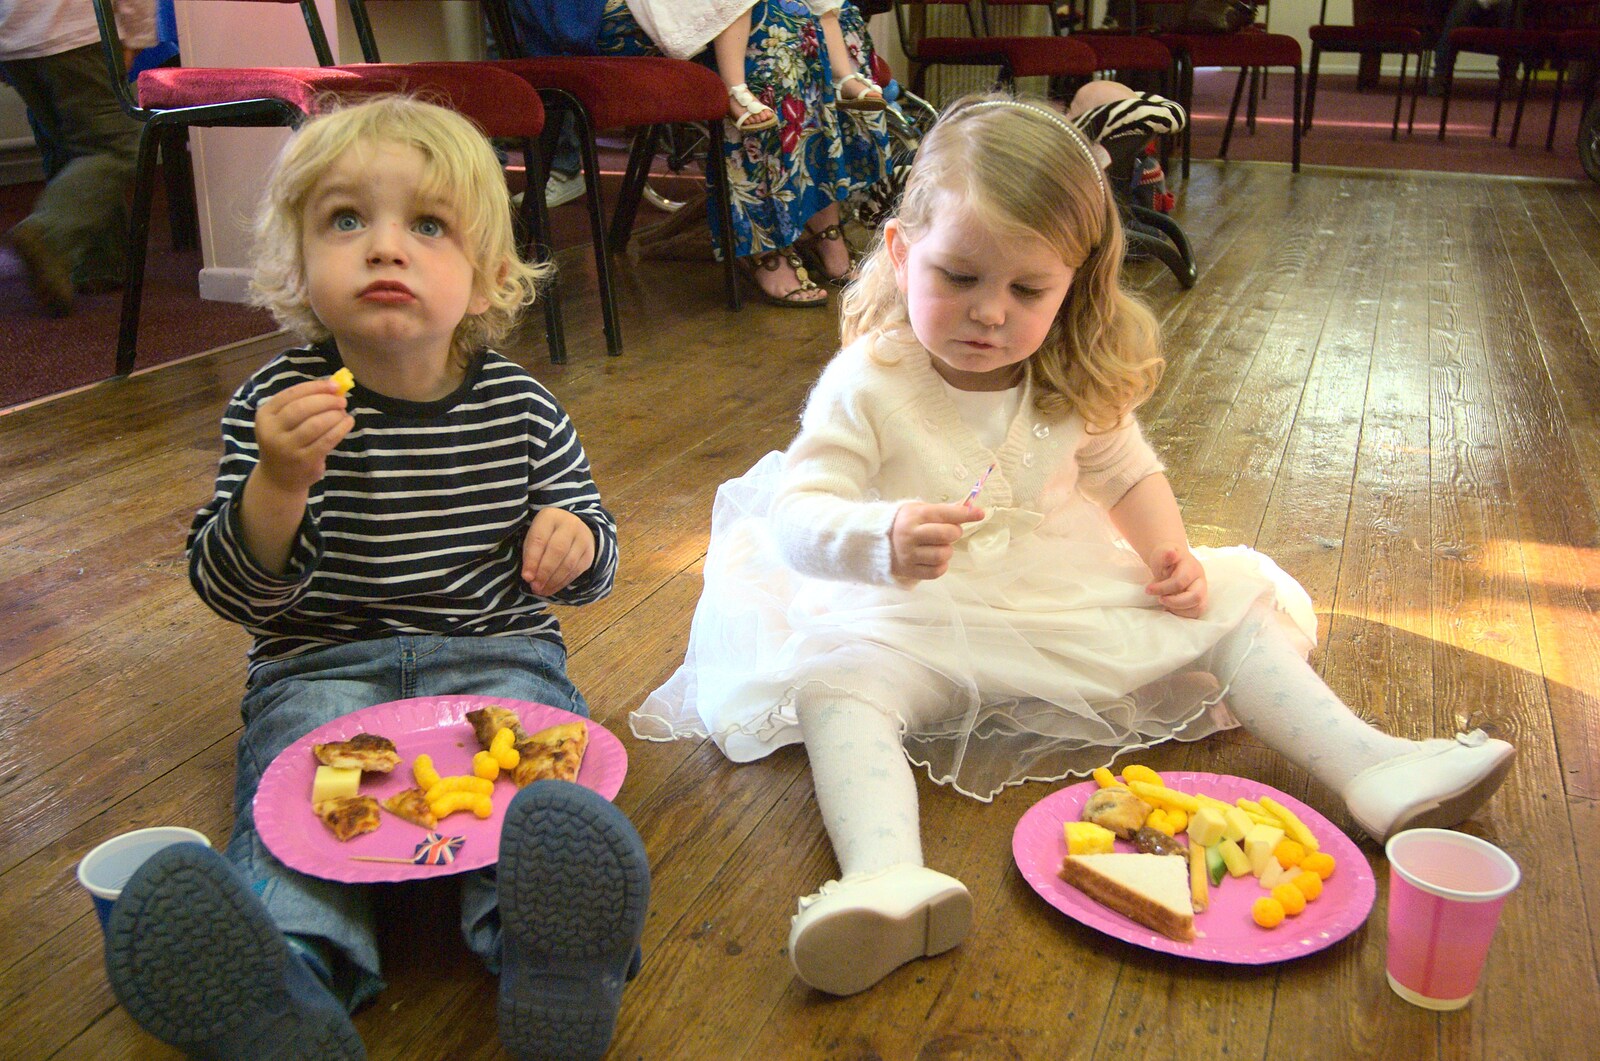 Fred and Amelia eat food from Charles and the Royal Wedding, Brome, Suffolk - 24th April 2011